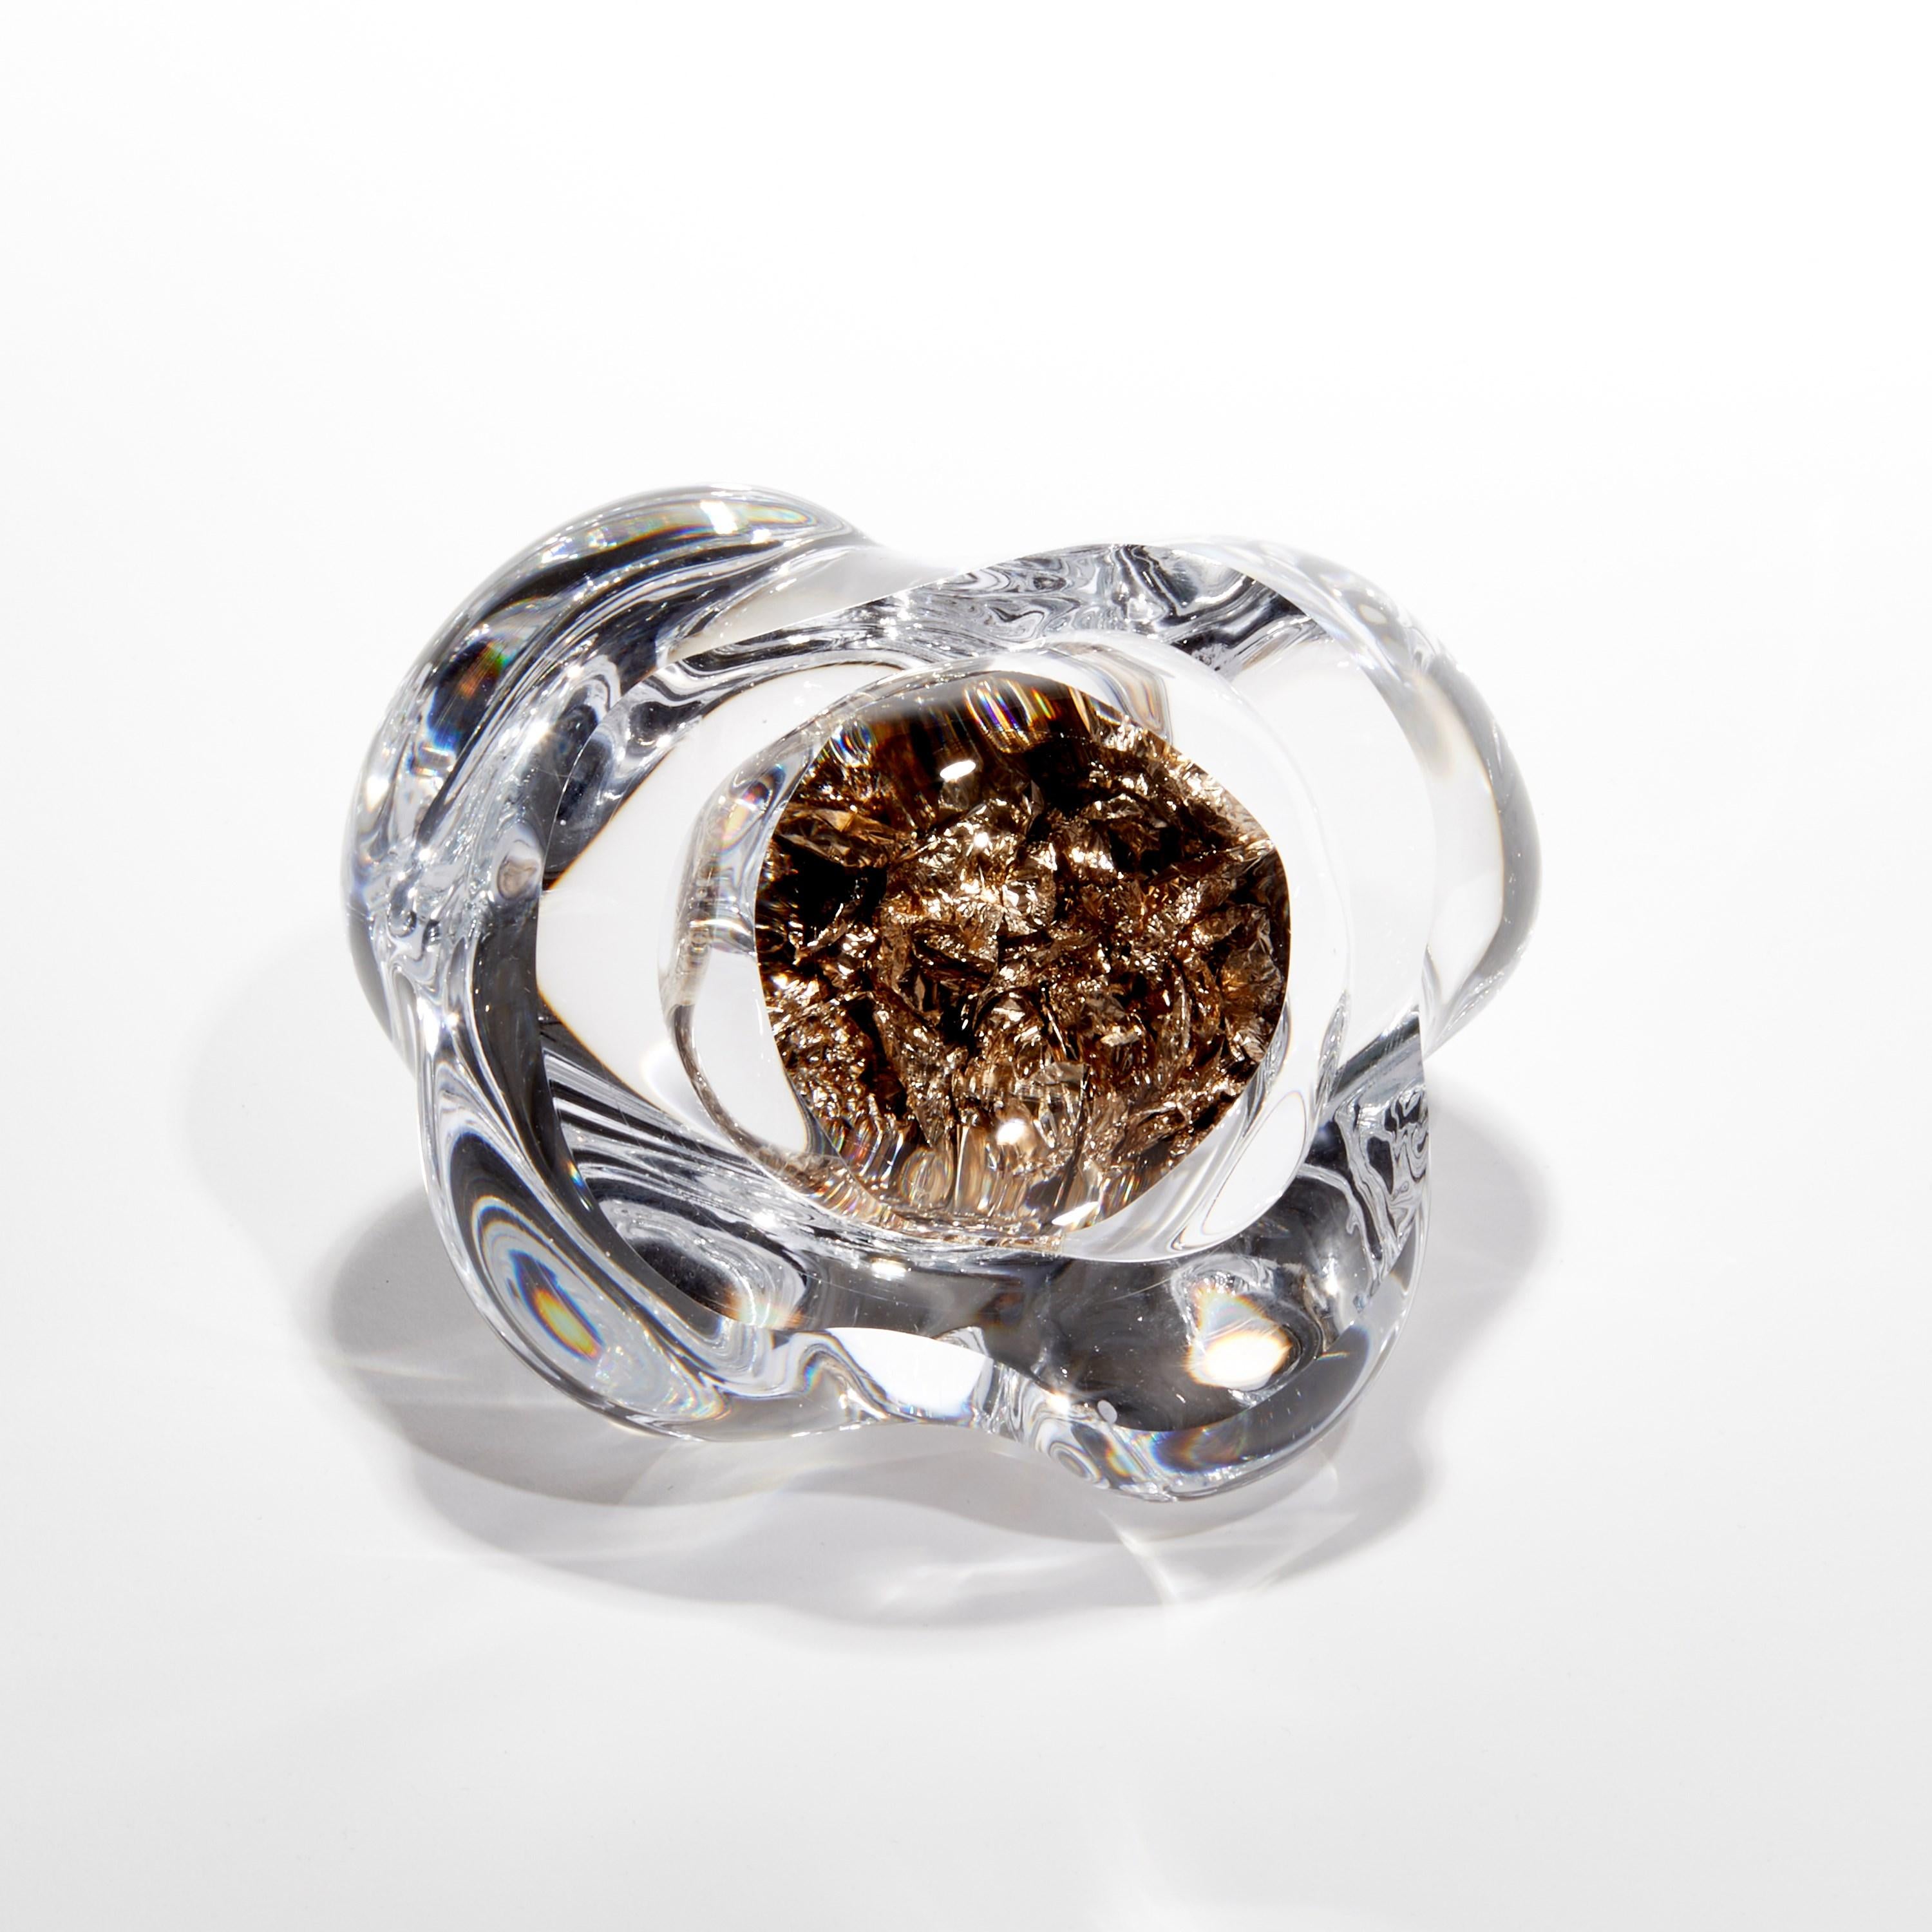 Organic Modern Erratic H with 22.5ct Champagne Gold, a Glass Rock Sculpture by Anthony Scala